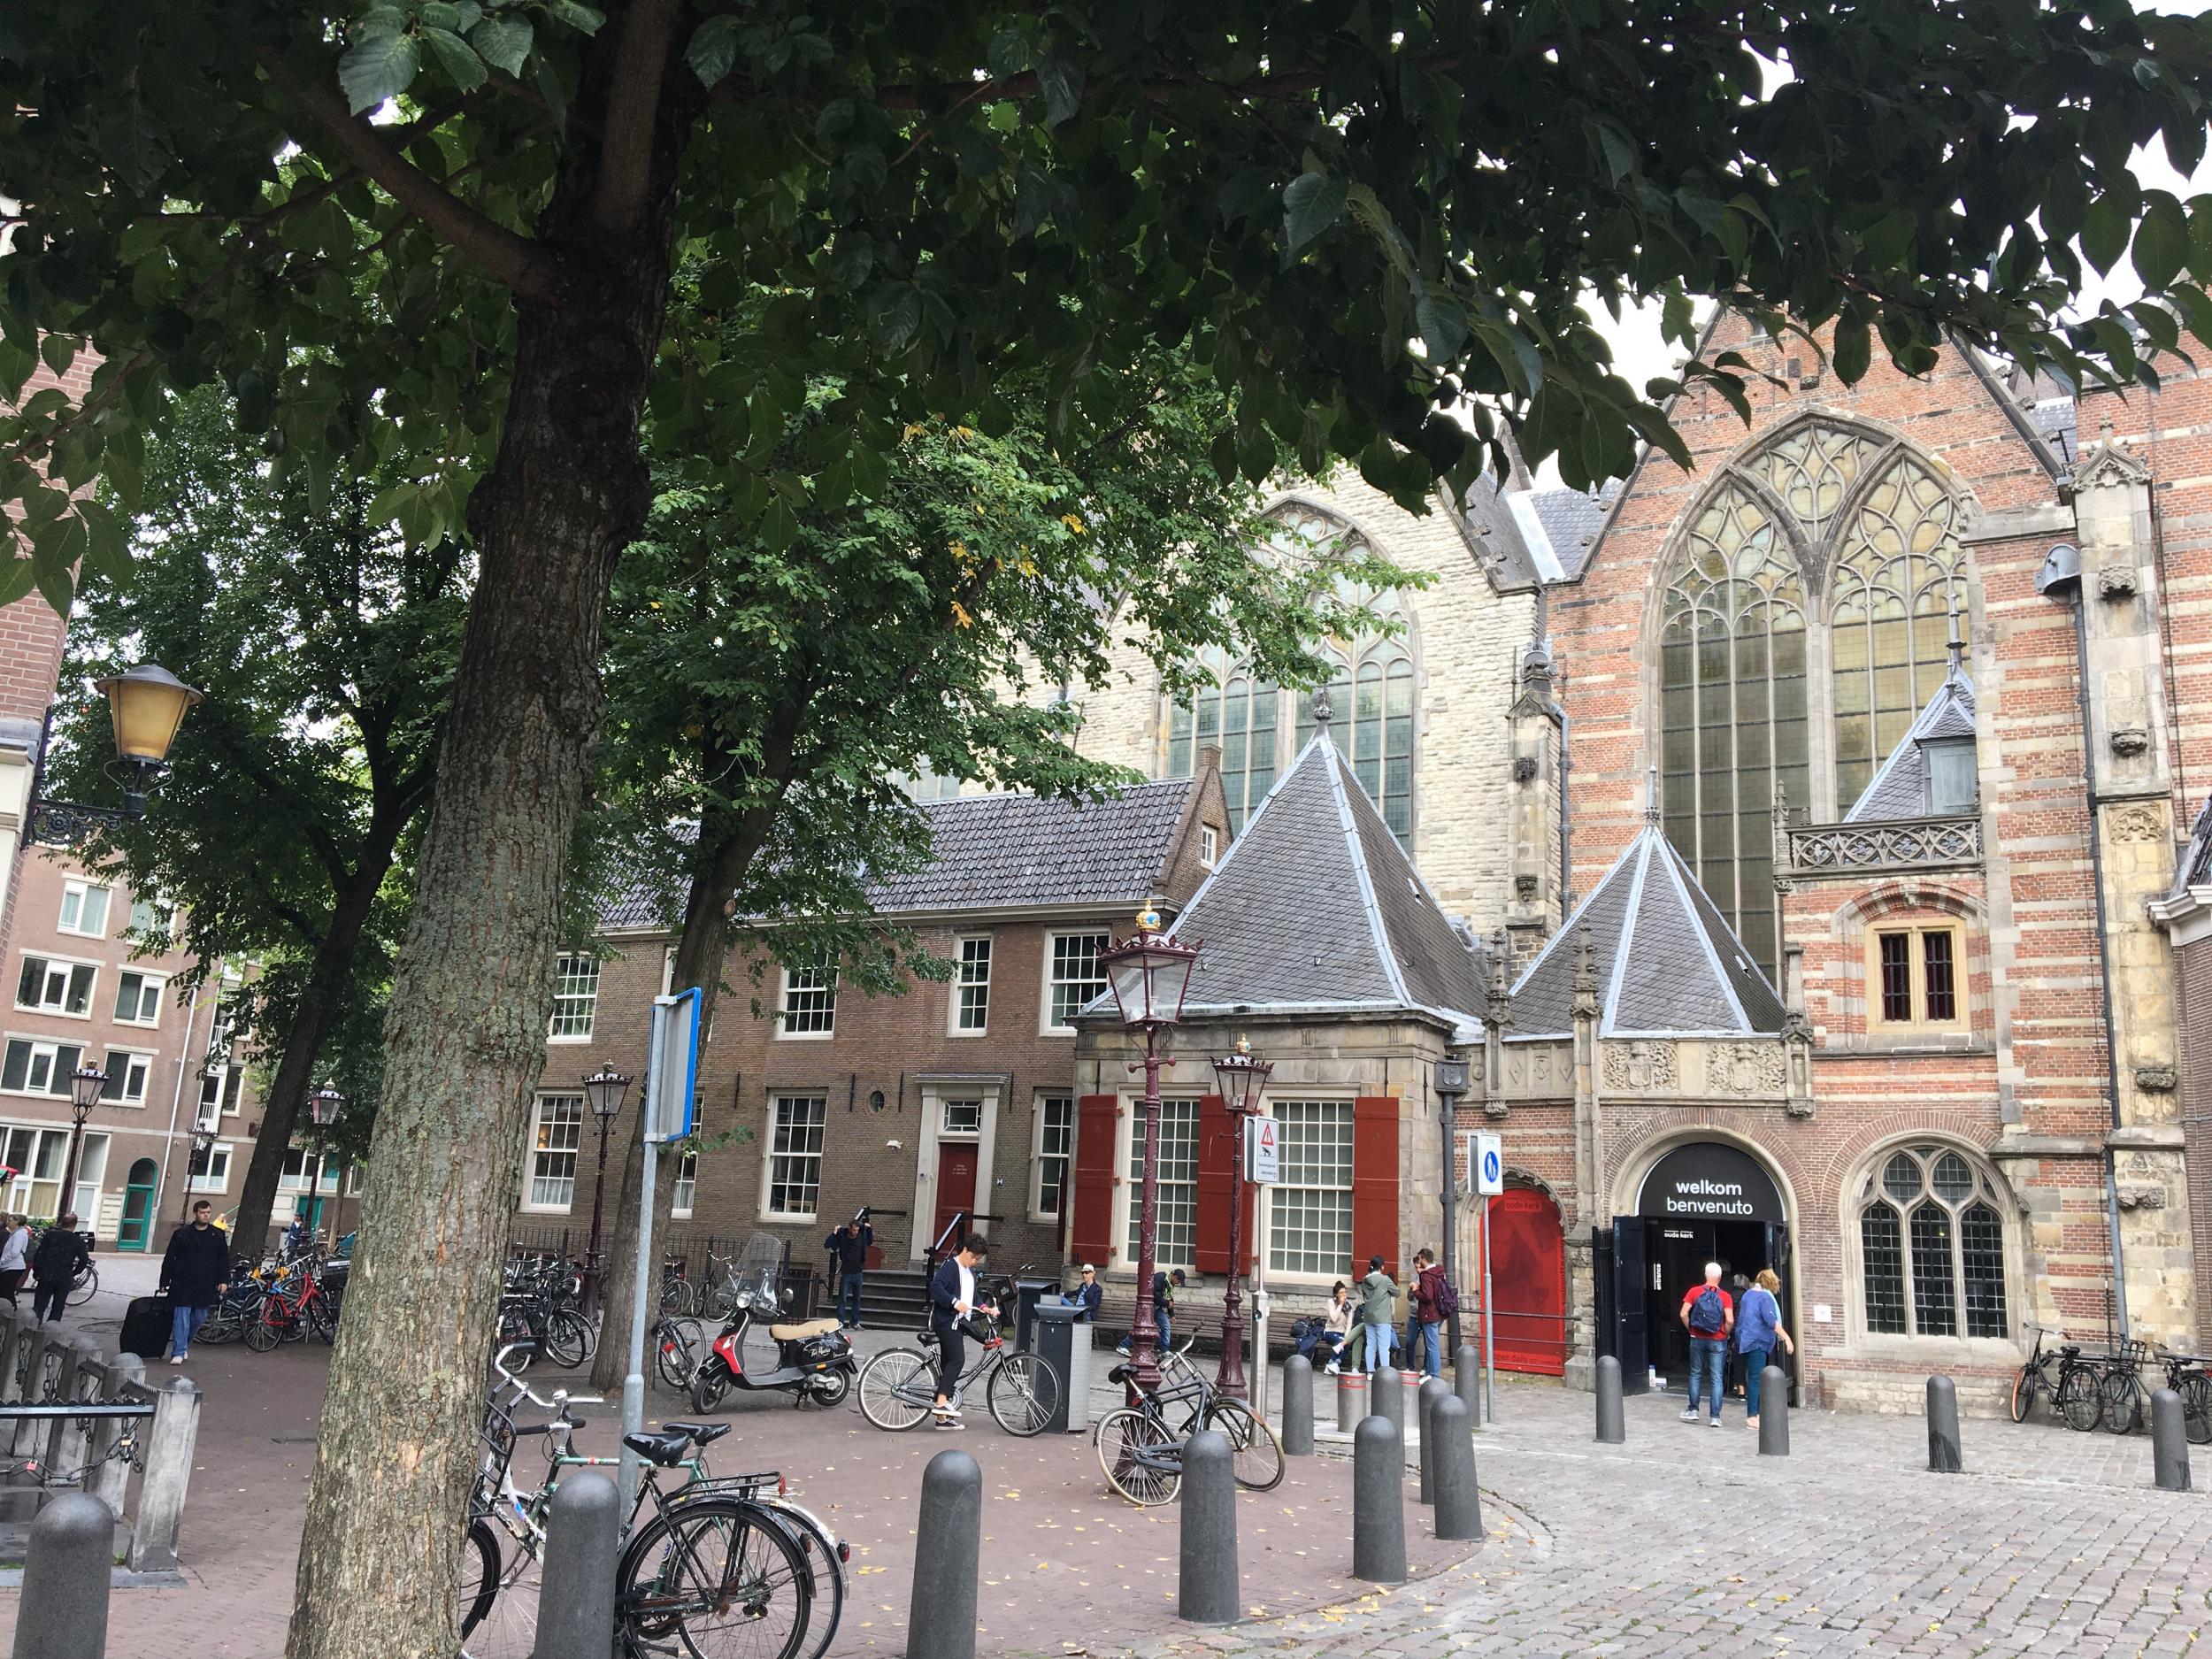 Amsterdam’s Oude Kerk dates back to the 14th century